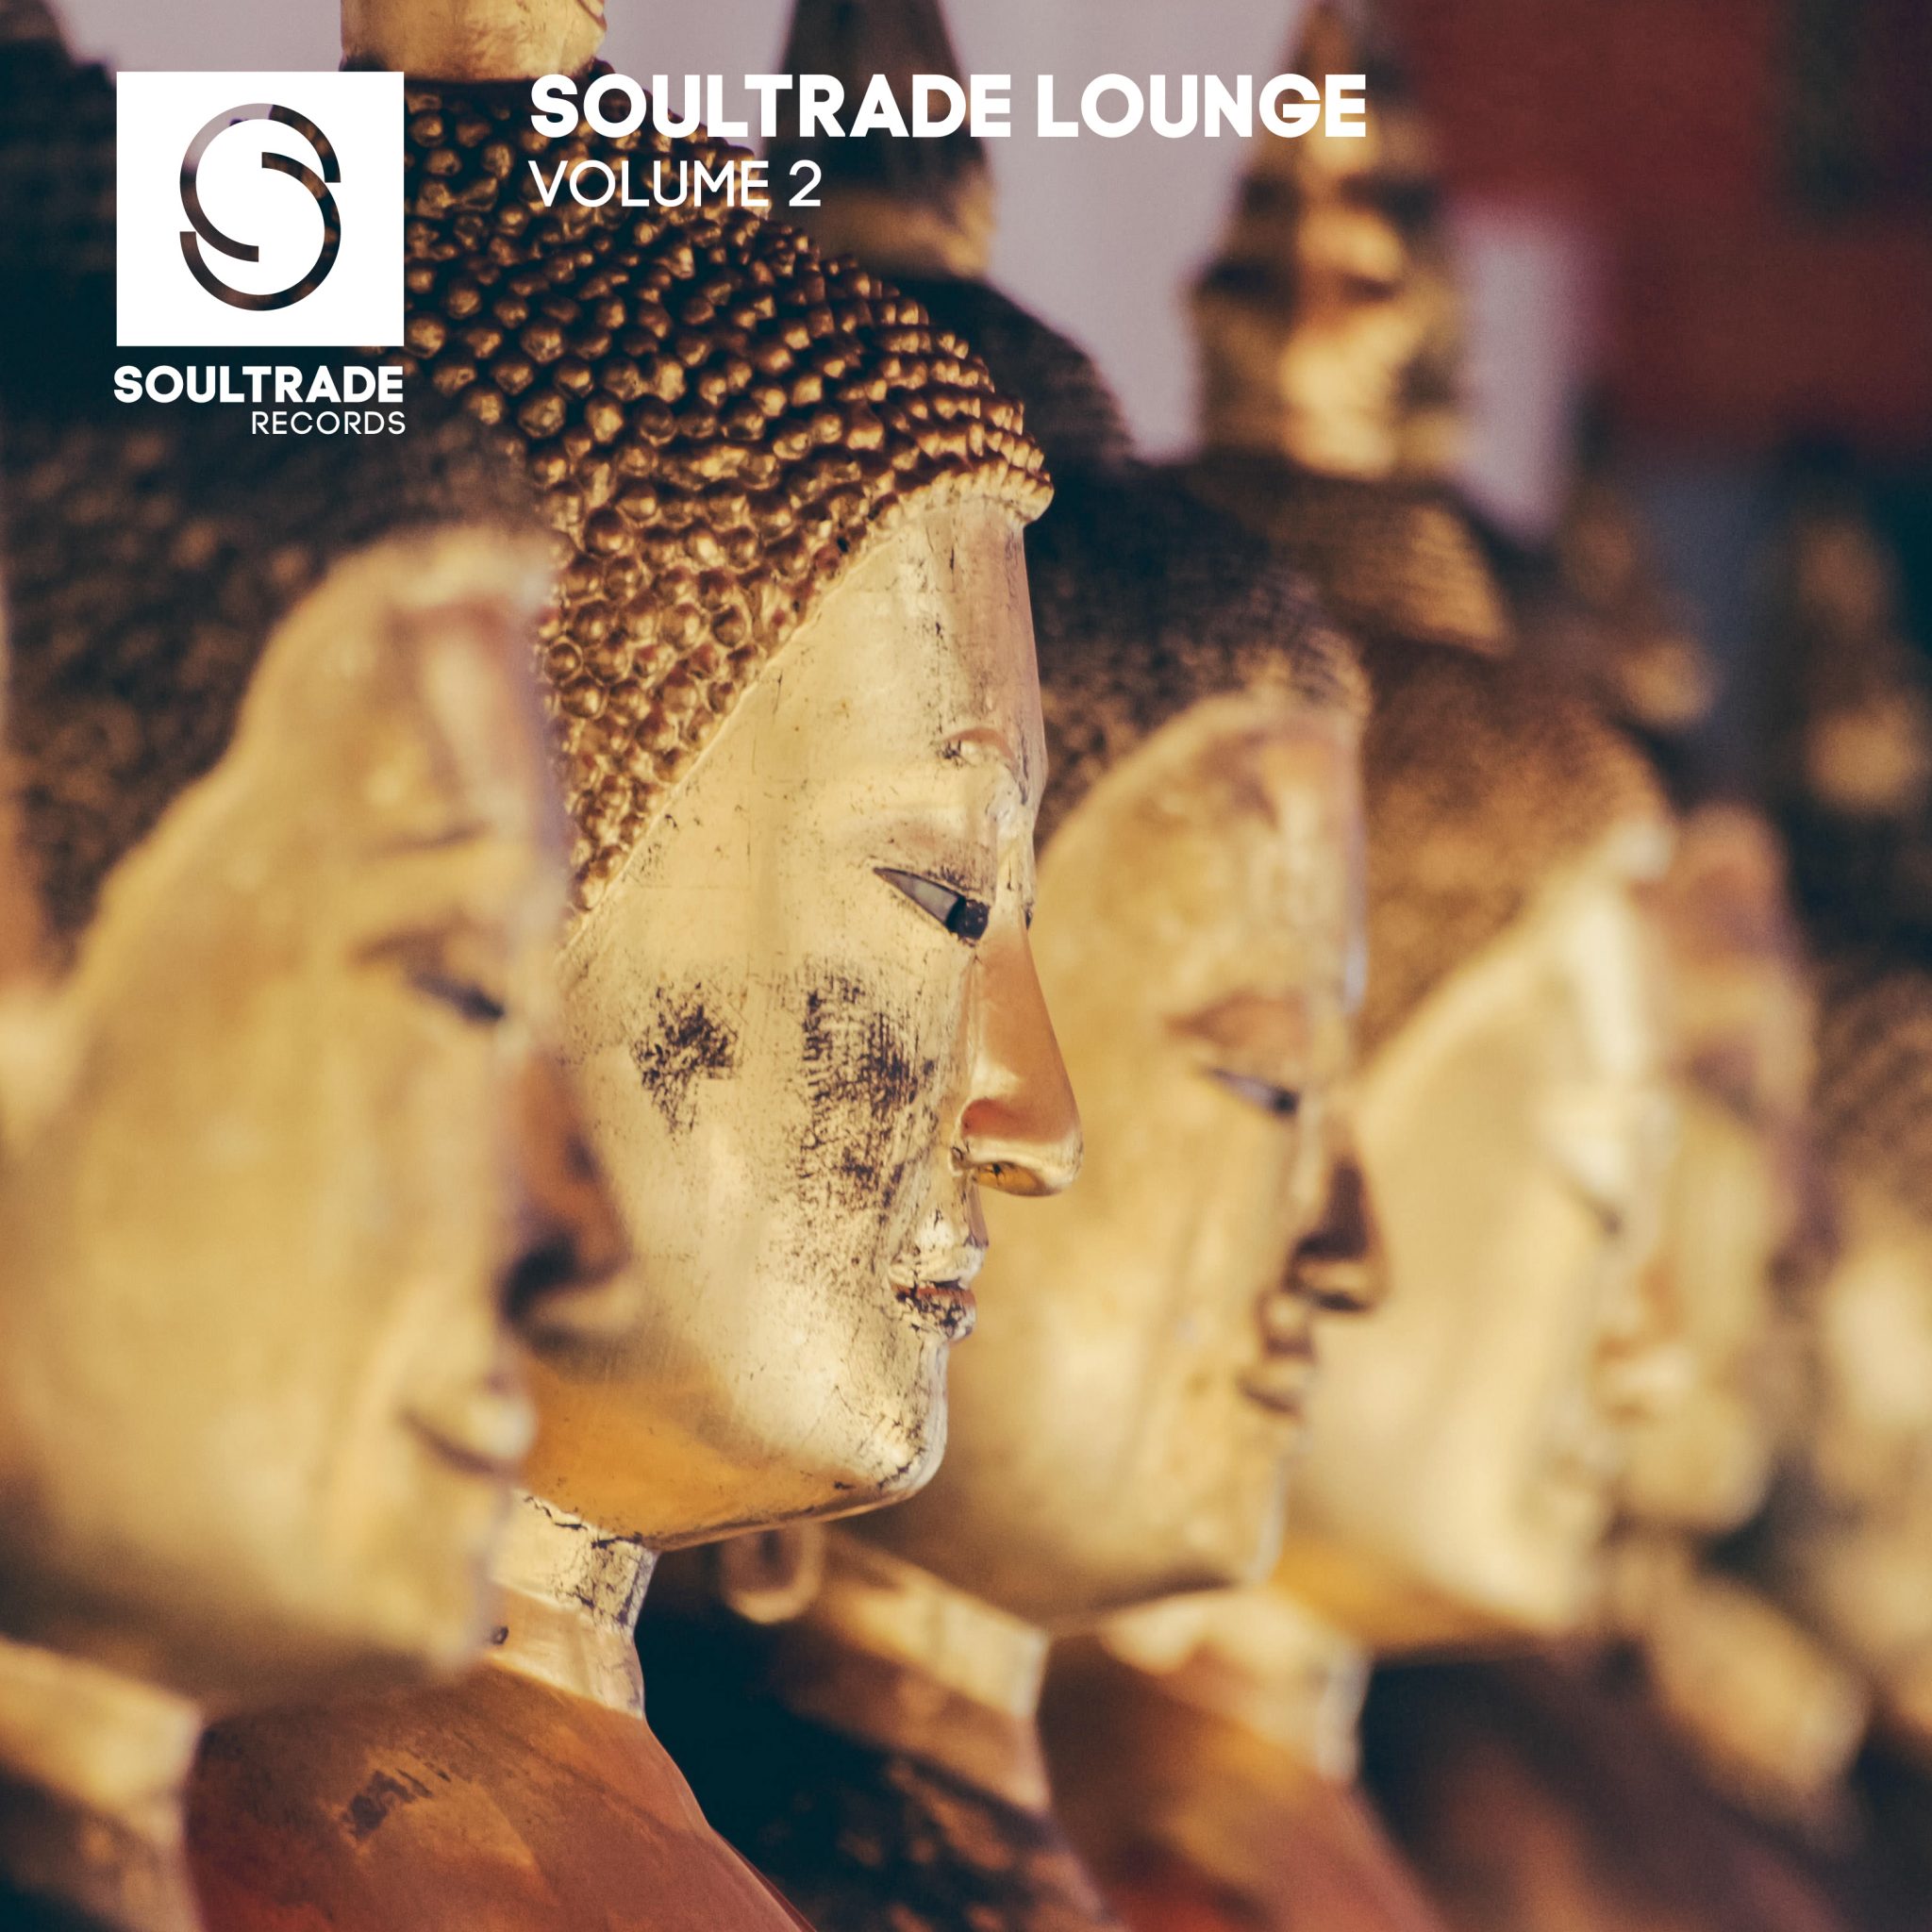 Radio Edit of Tara’s Dance included in the latest Soultrade Records Compilation